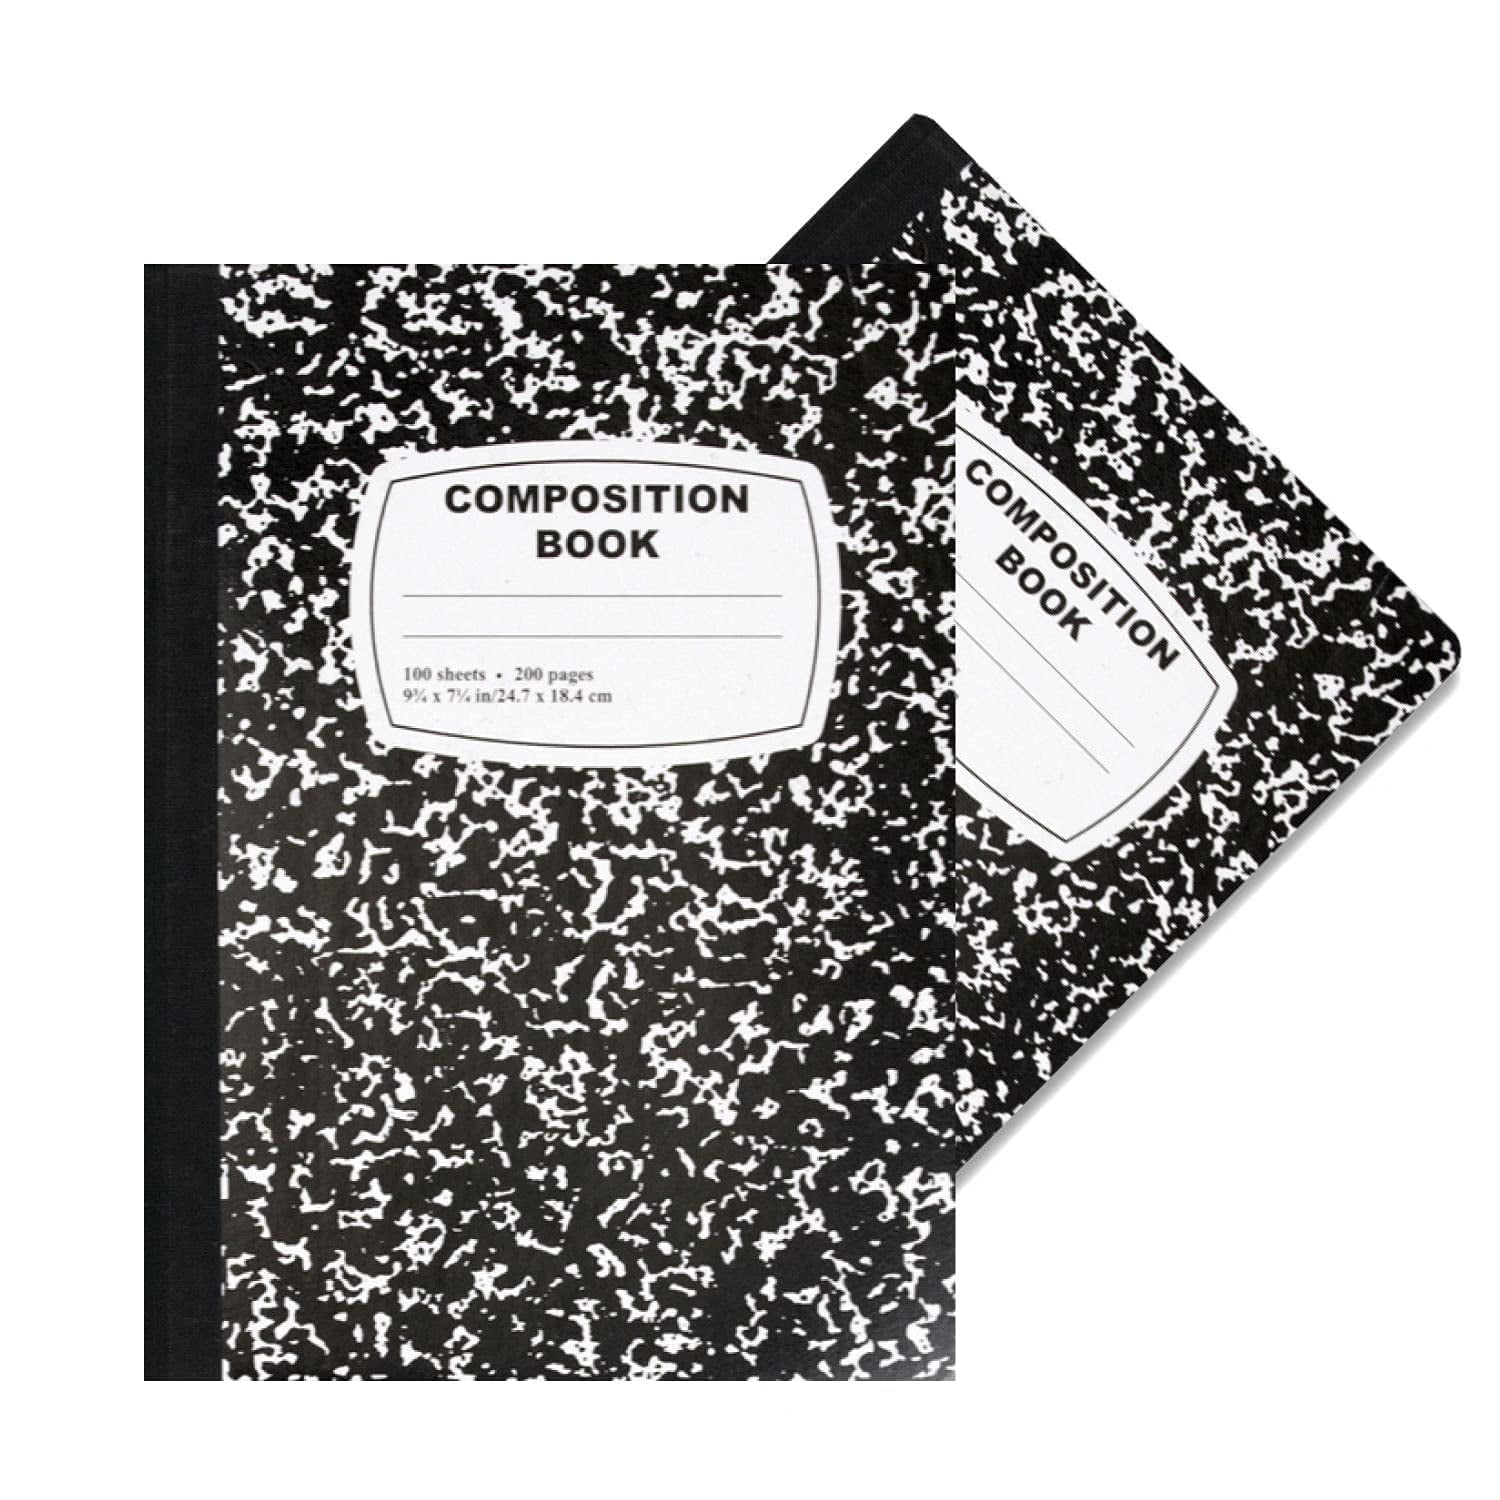 Classic College Ruled Composition Notebook for School Supplies 50